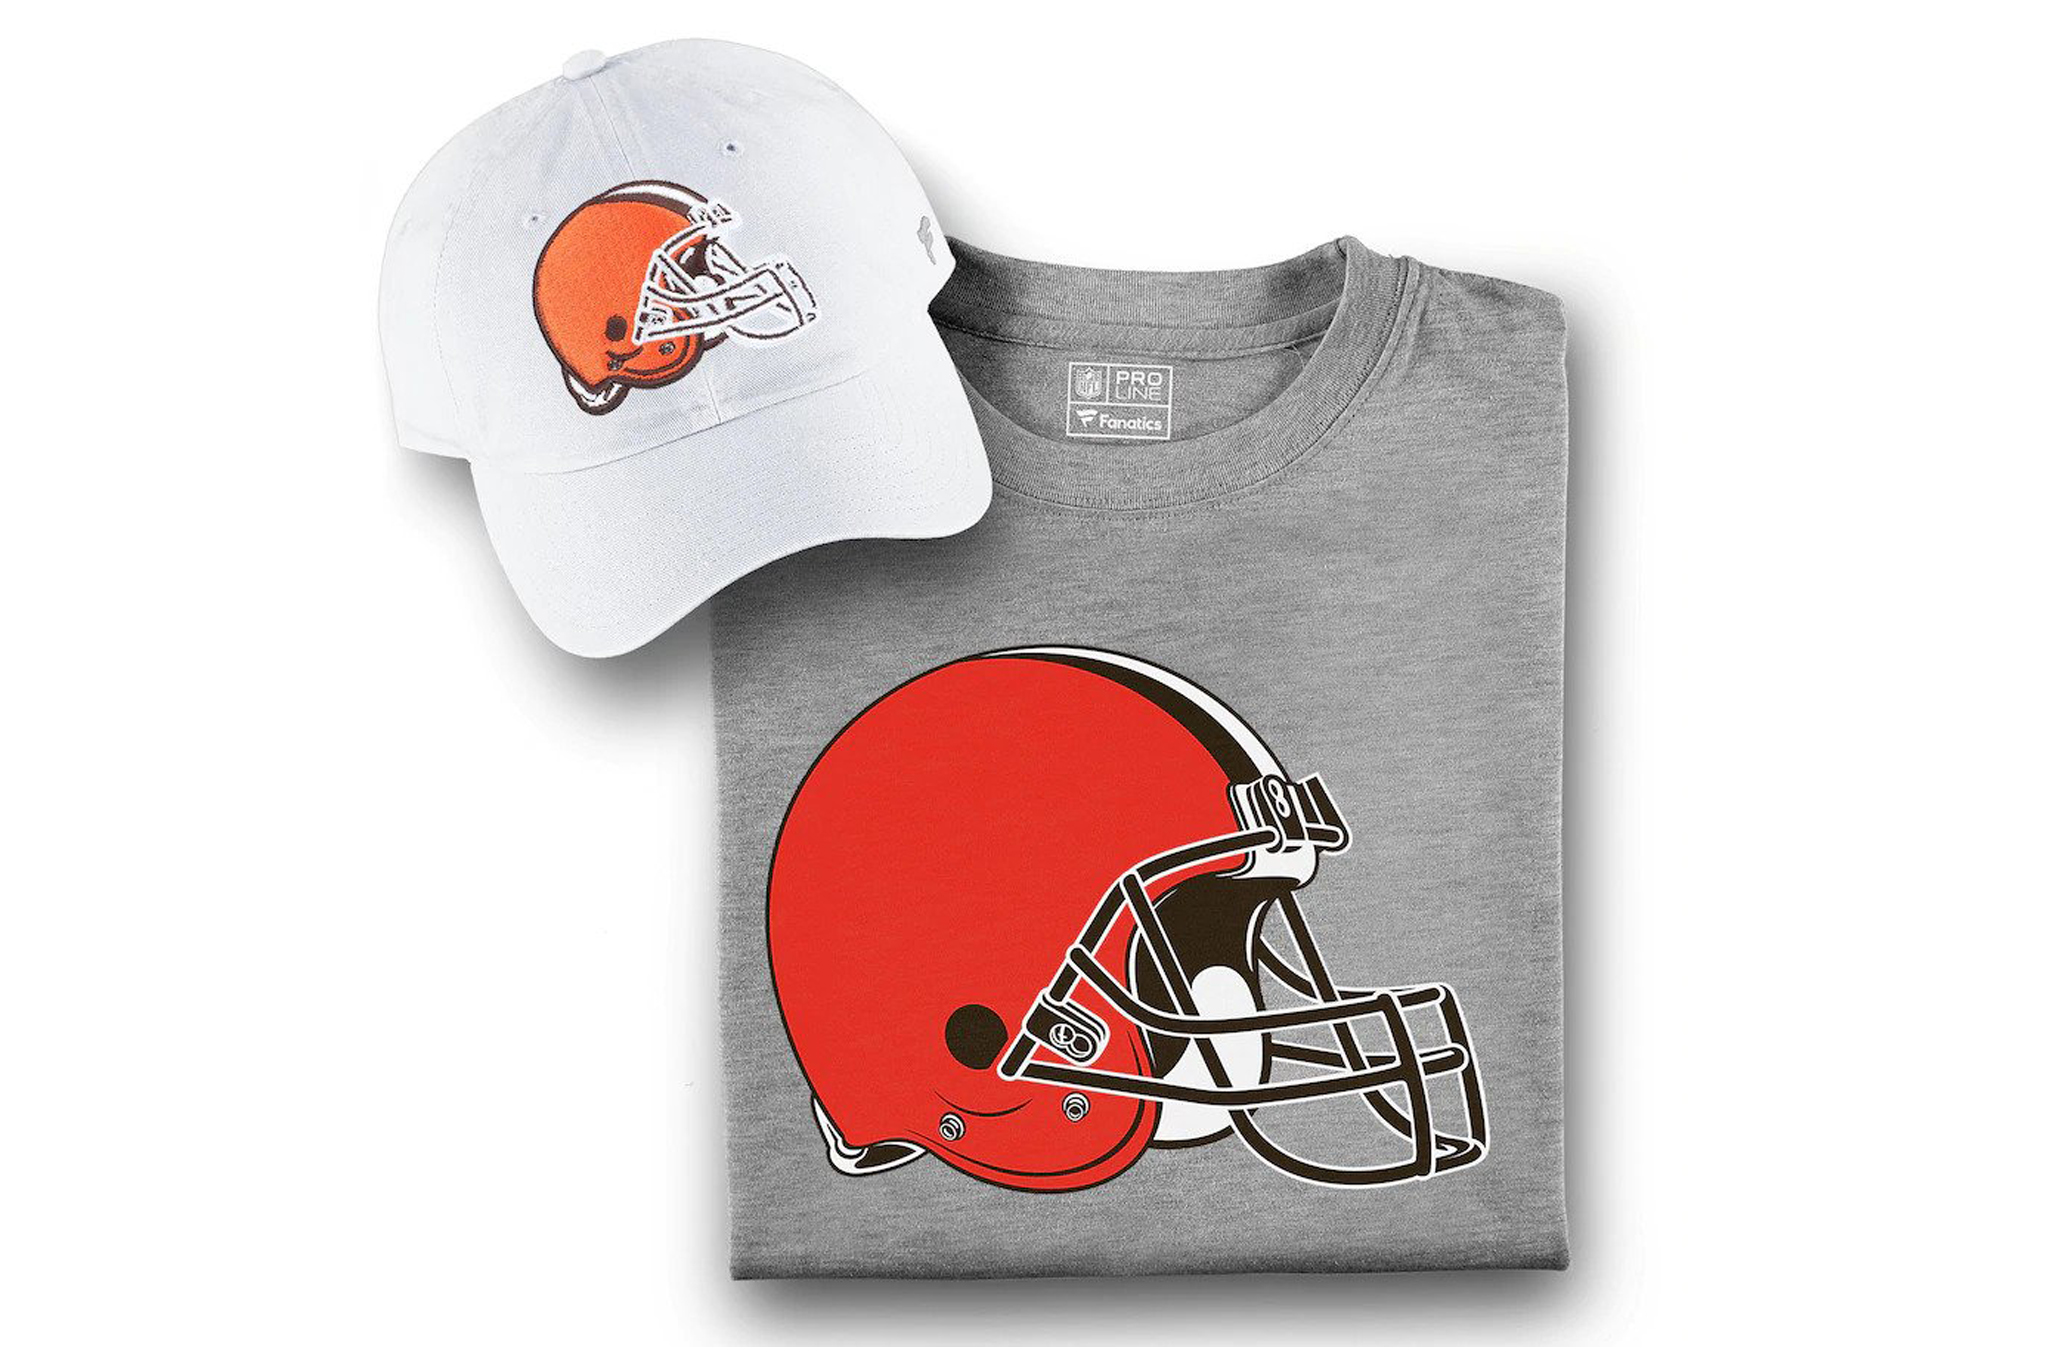 Cleveland Browns gear from last season is gonna be on clearance now